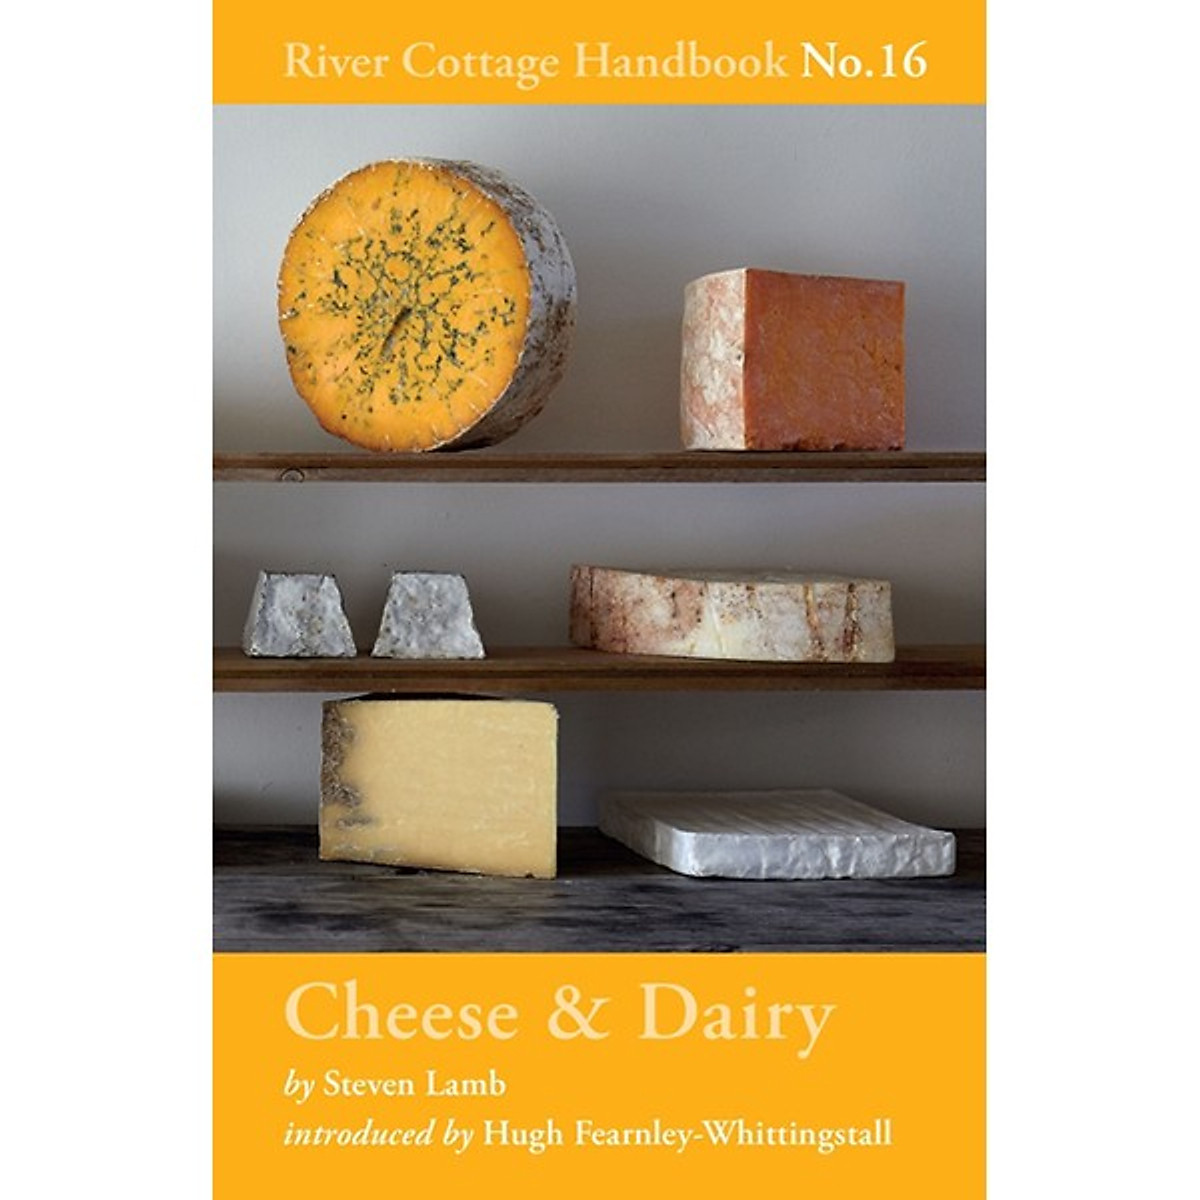 Cheese and Dairy